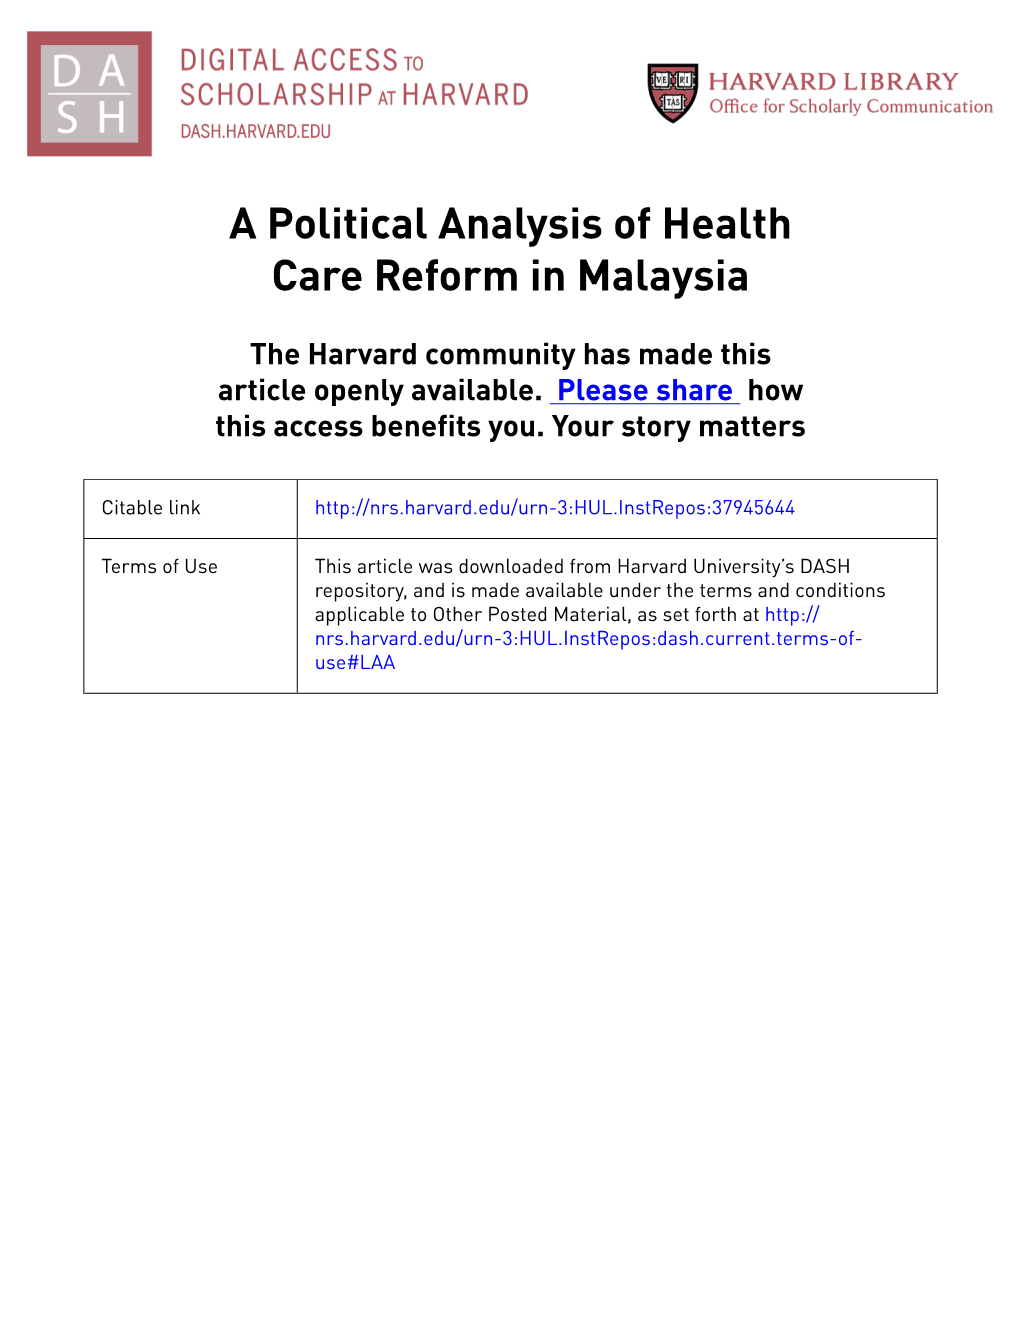 A Political Analysis of Health Care Reform in Malaysia